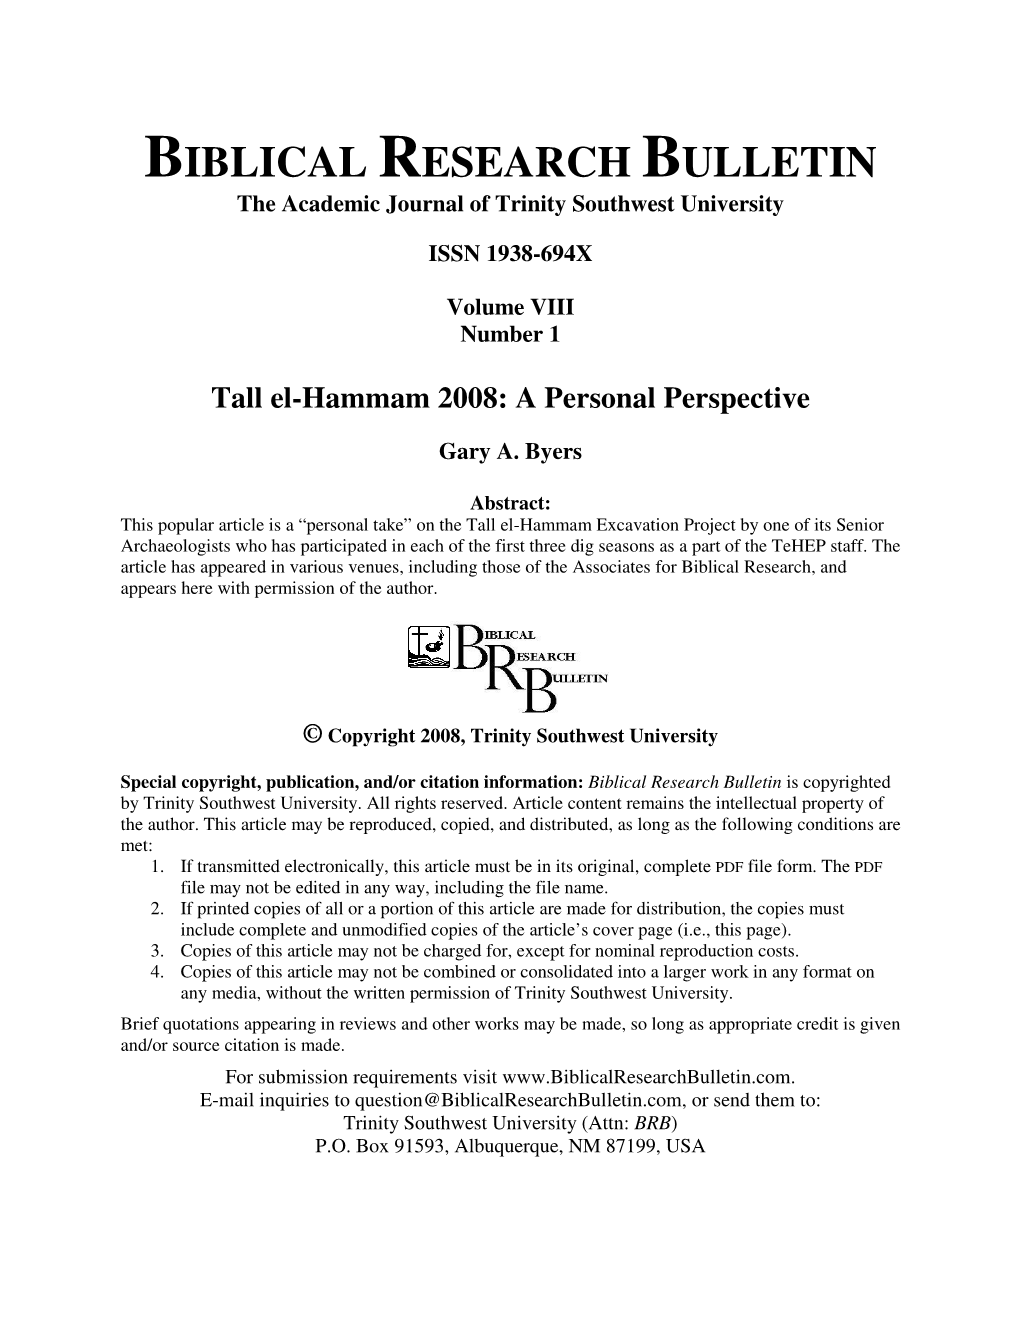 BIBLICAL RESEARCH BULLETIN the Academic Journal of Trinity Southwest University